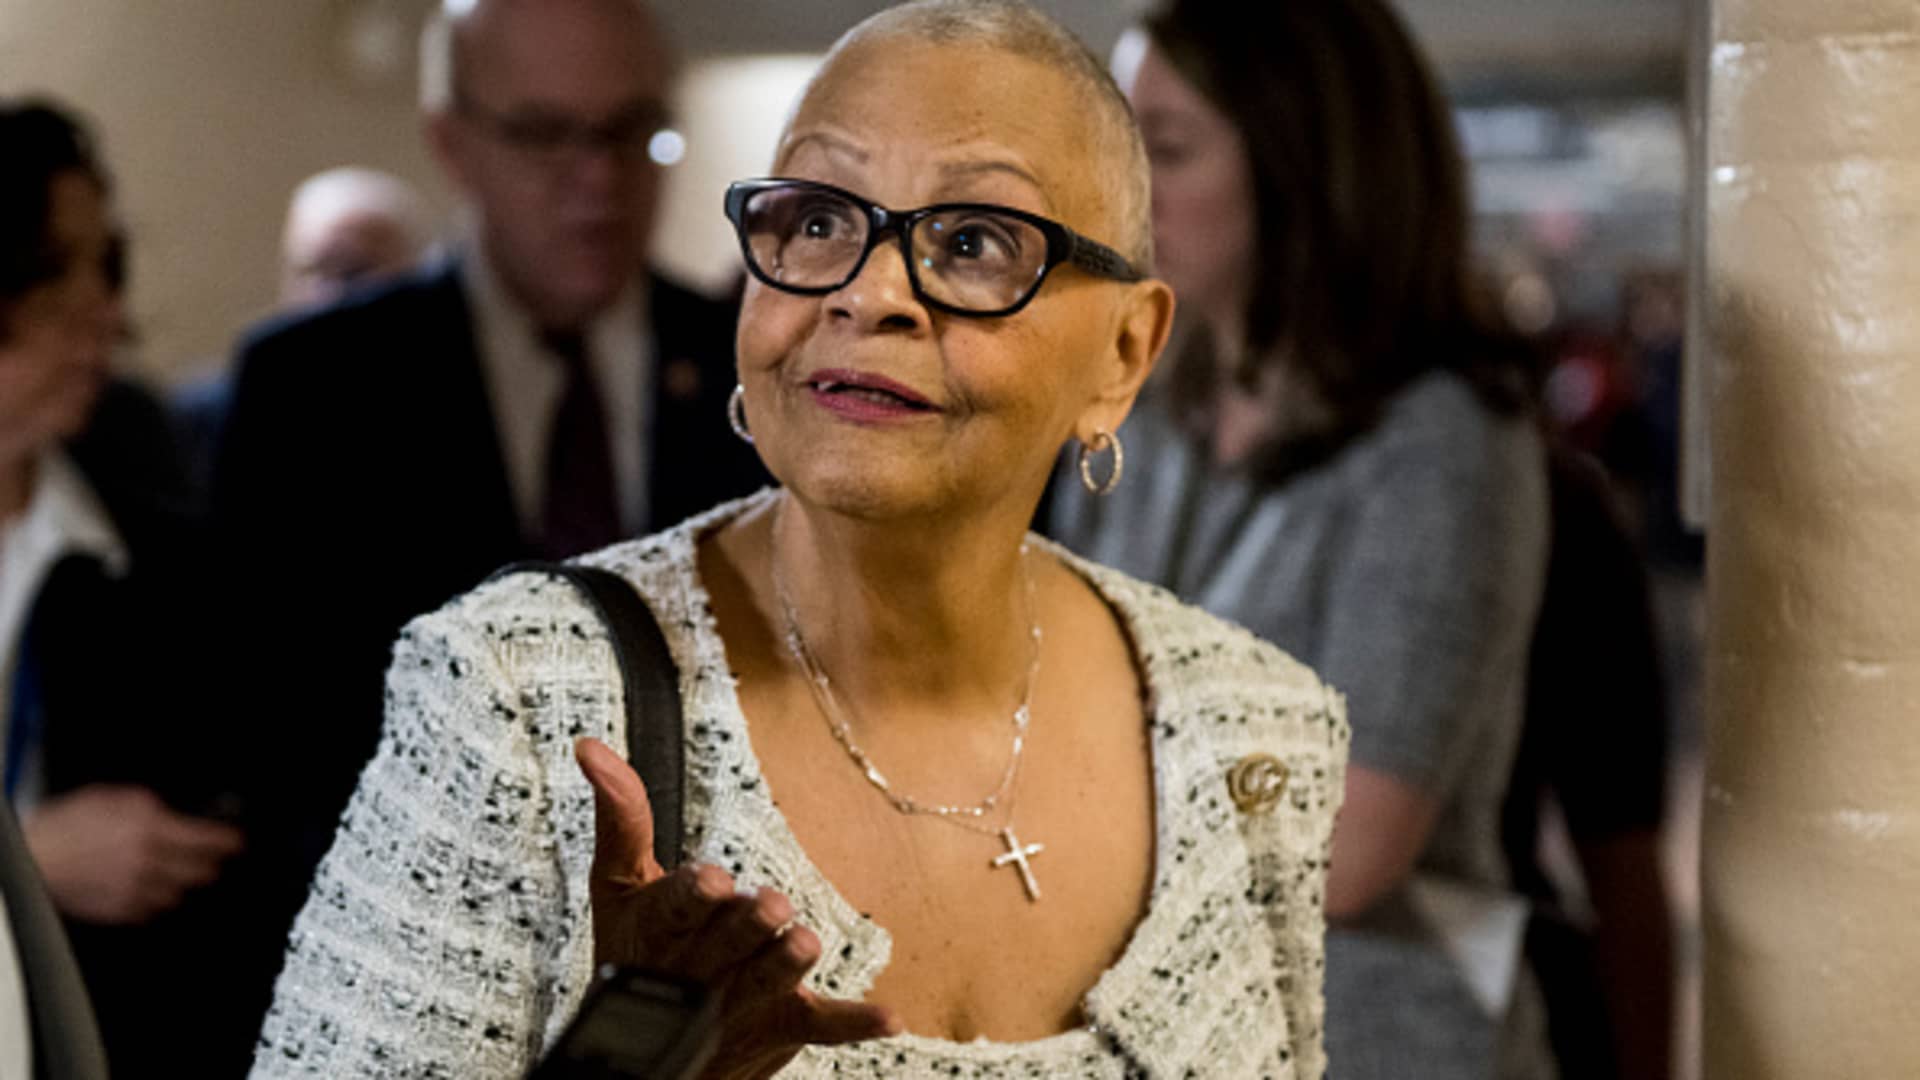 Rep. Bonnie Watson Coleman, D-N.J., leaves the House Democrats' caucus meeting in the Capitol on Wednesday, March 6, 2019.